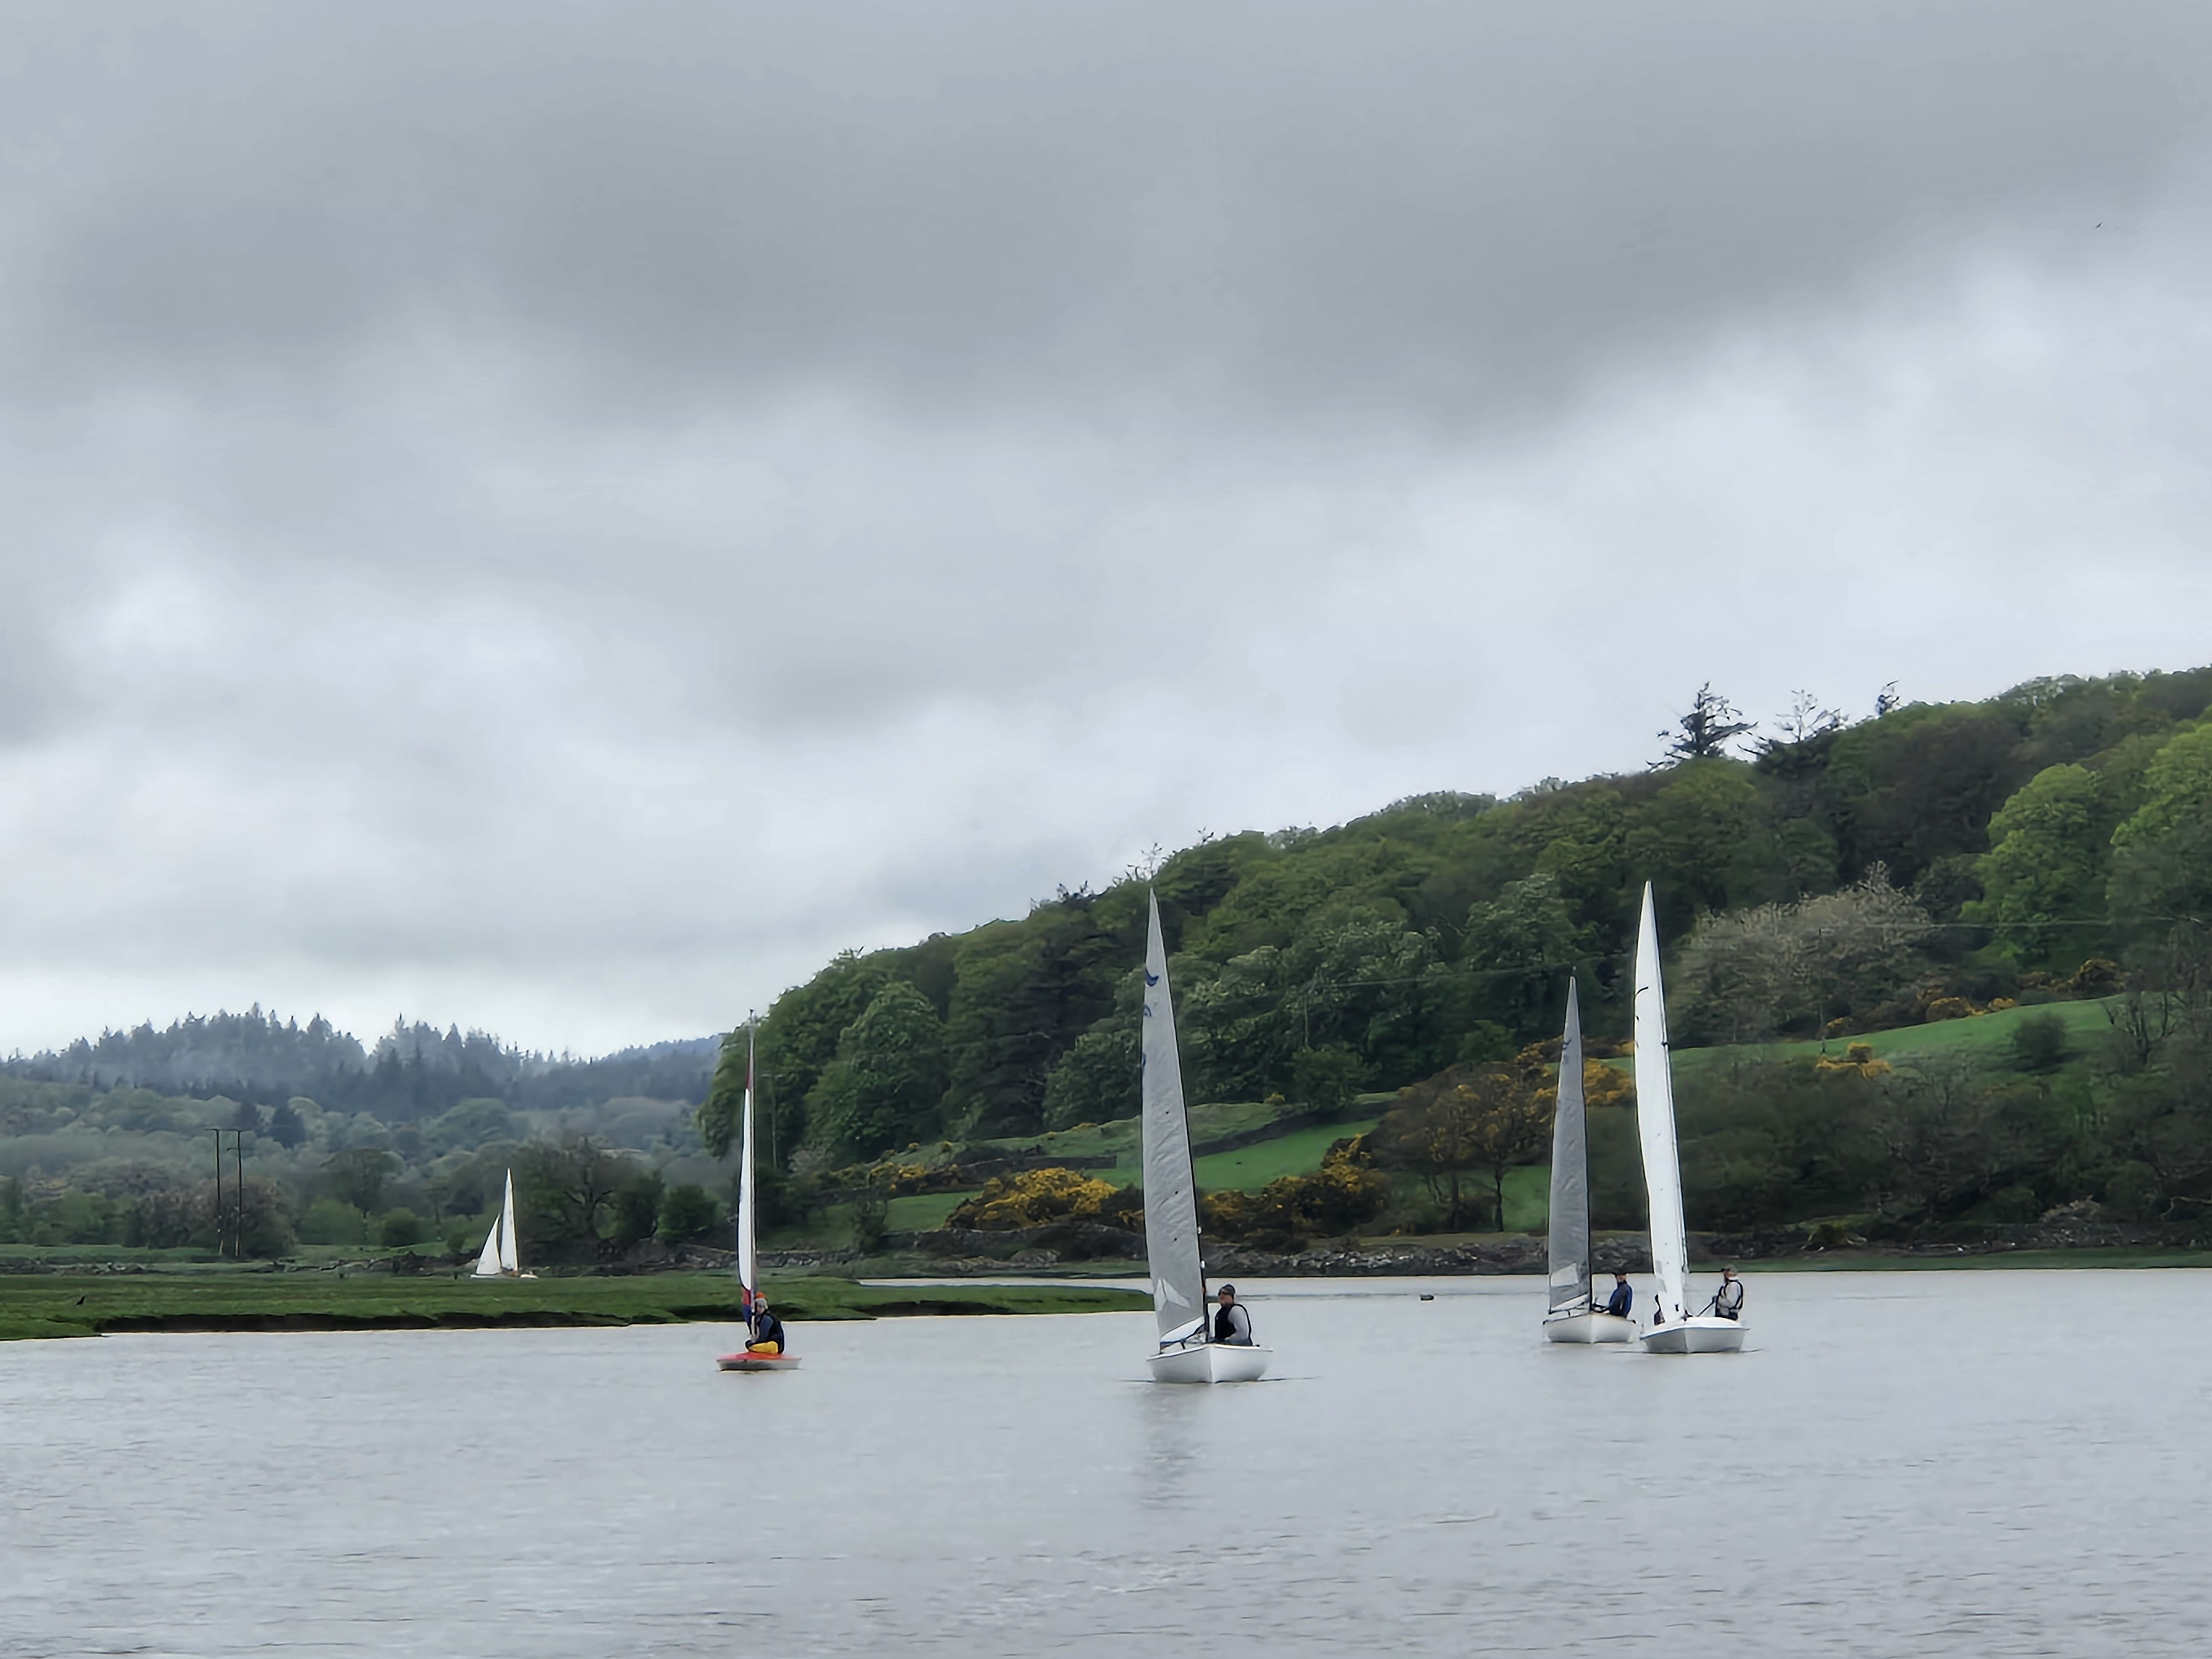 Light winds close racing, leader at the first Lucy Leyshon in Topper on left, next Stewart Mitchell, Keith Veasey both in Finns, far right eventual winners Colin Filer and Jamie Gascoigne in flying fifteen.